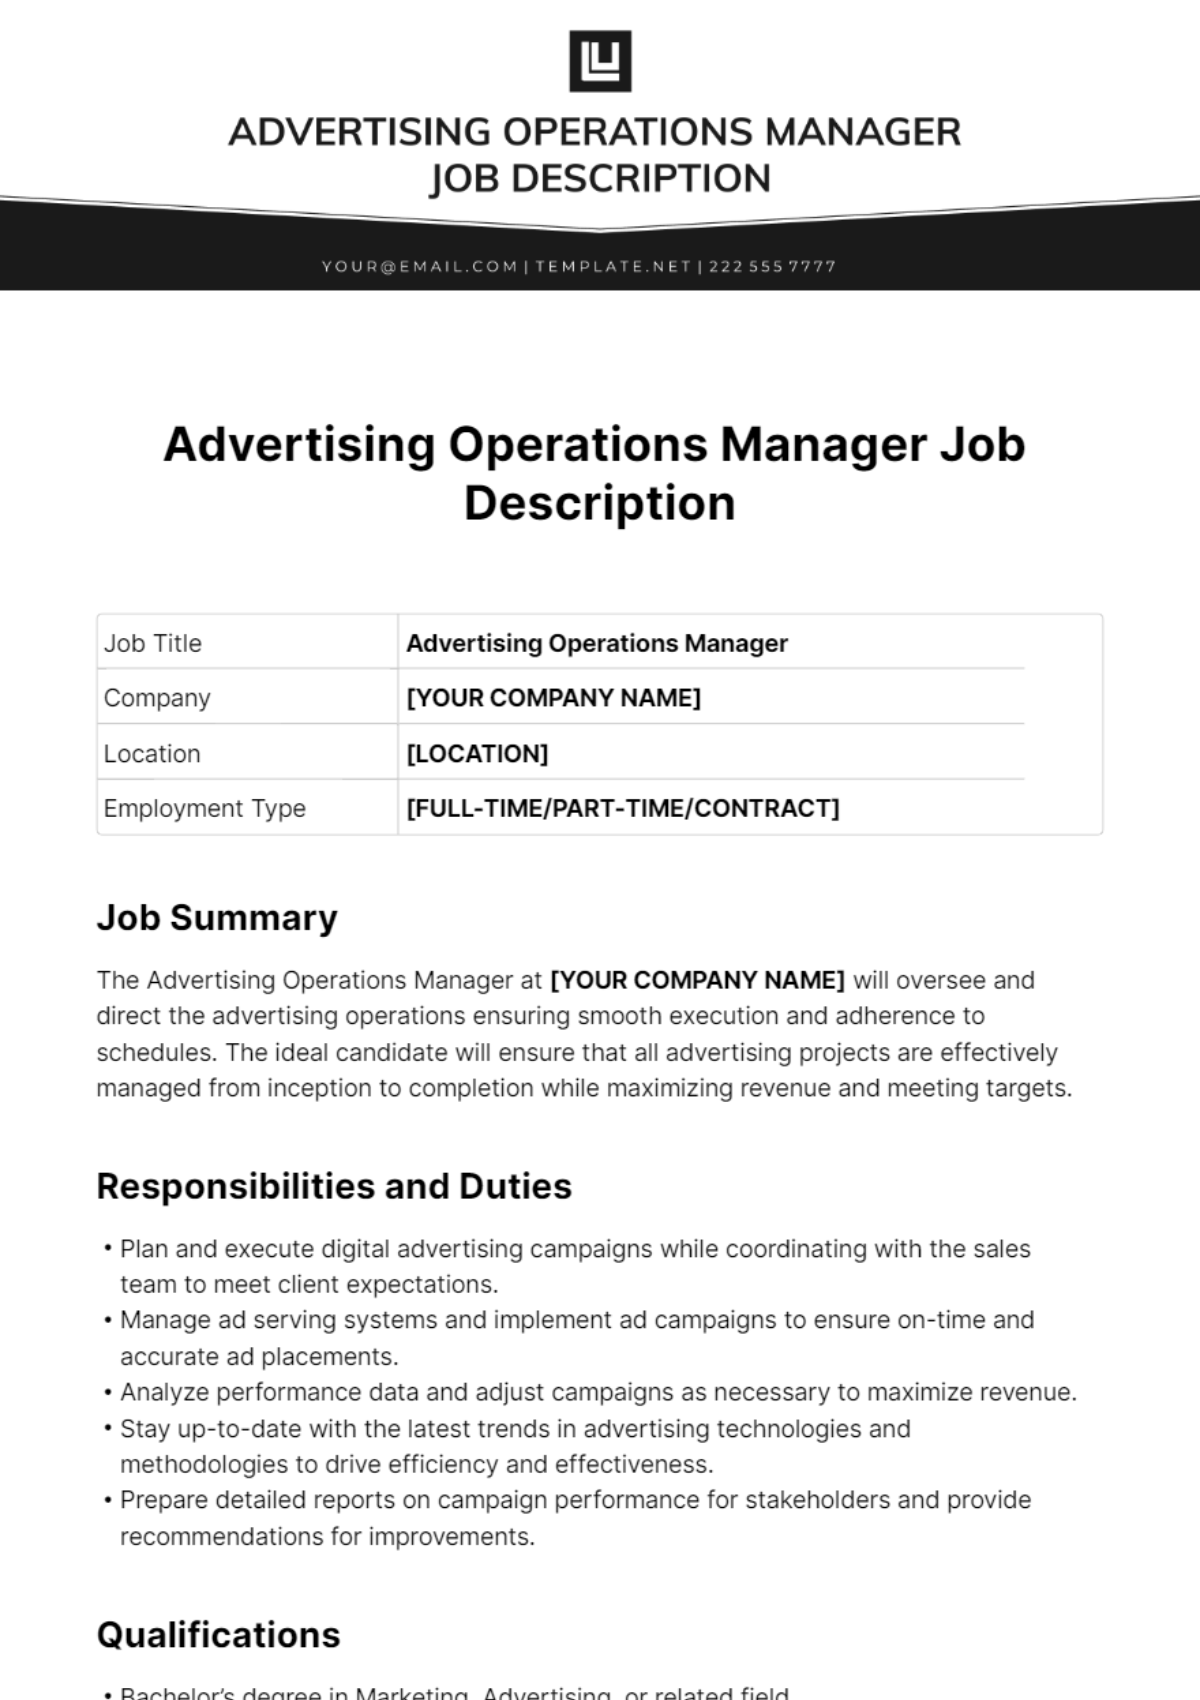 Free Advertising Operations Manager Job Description Template